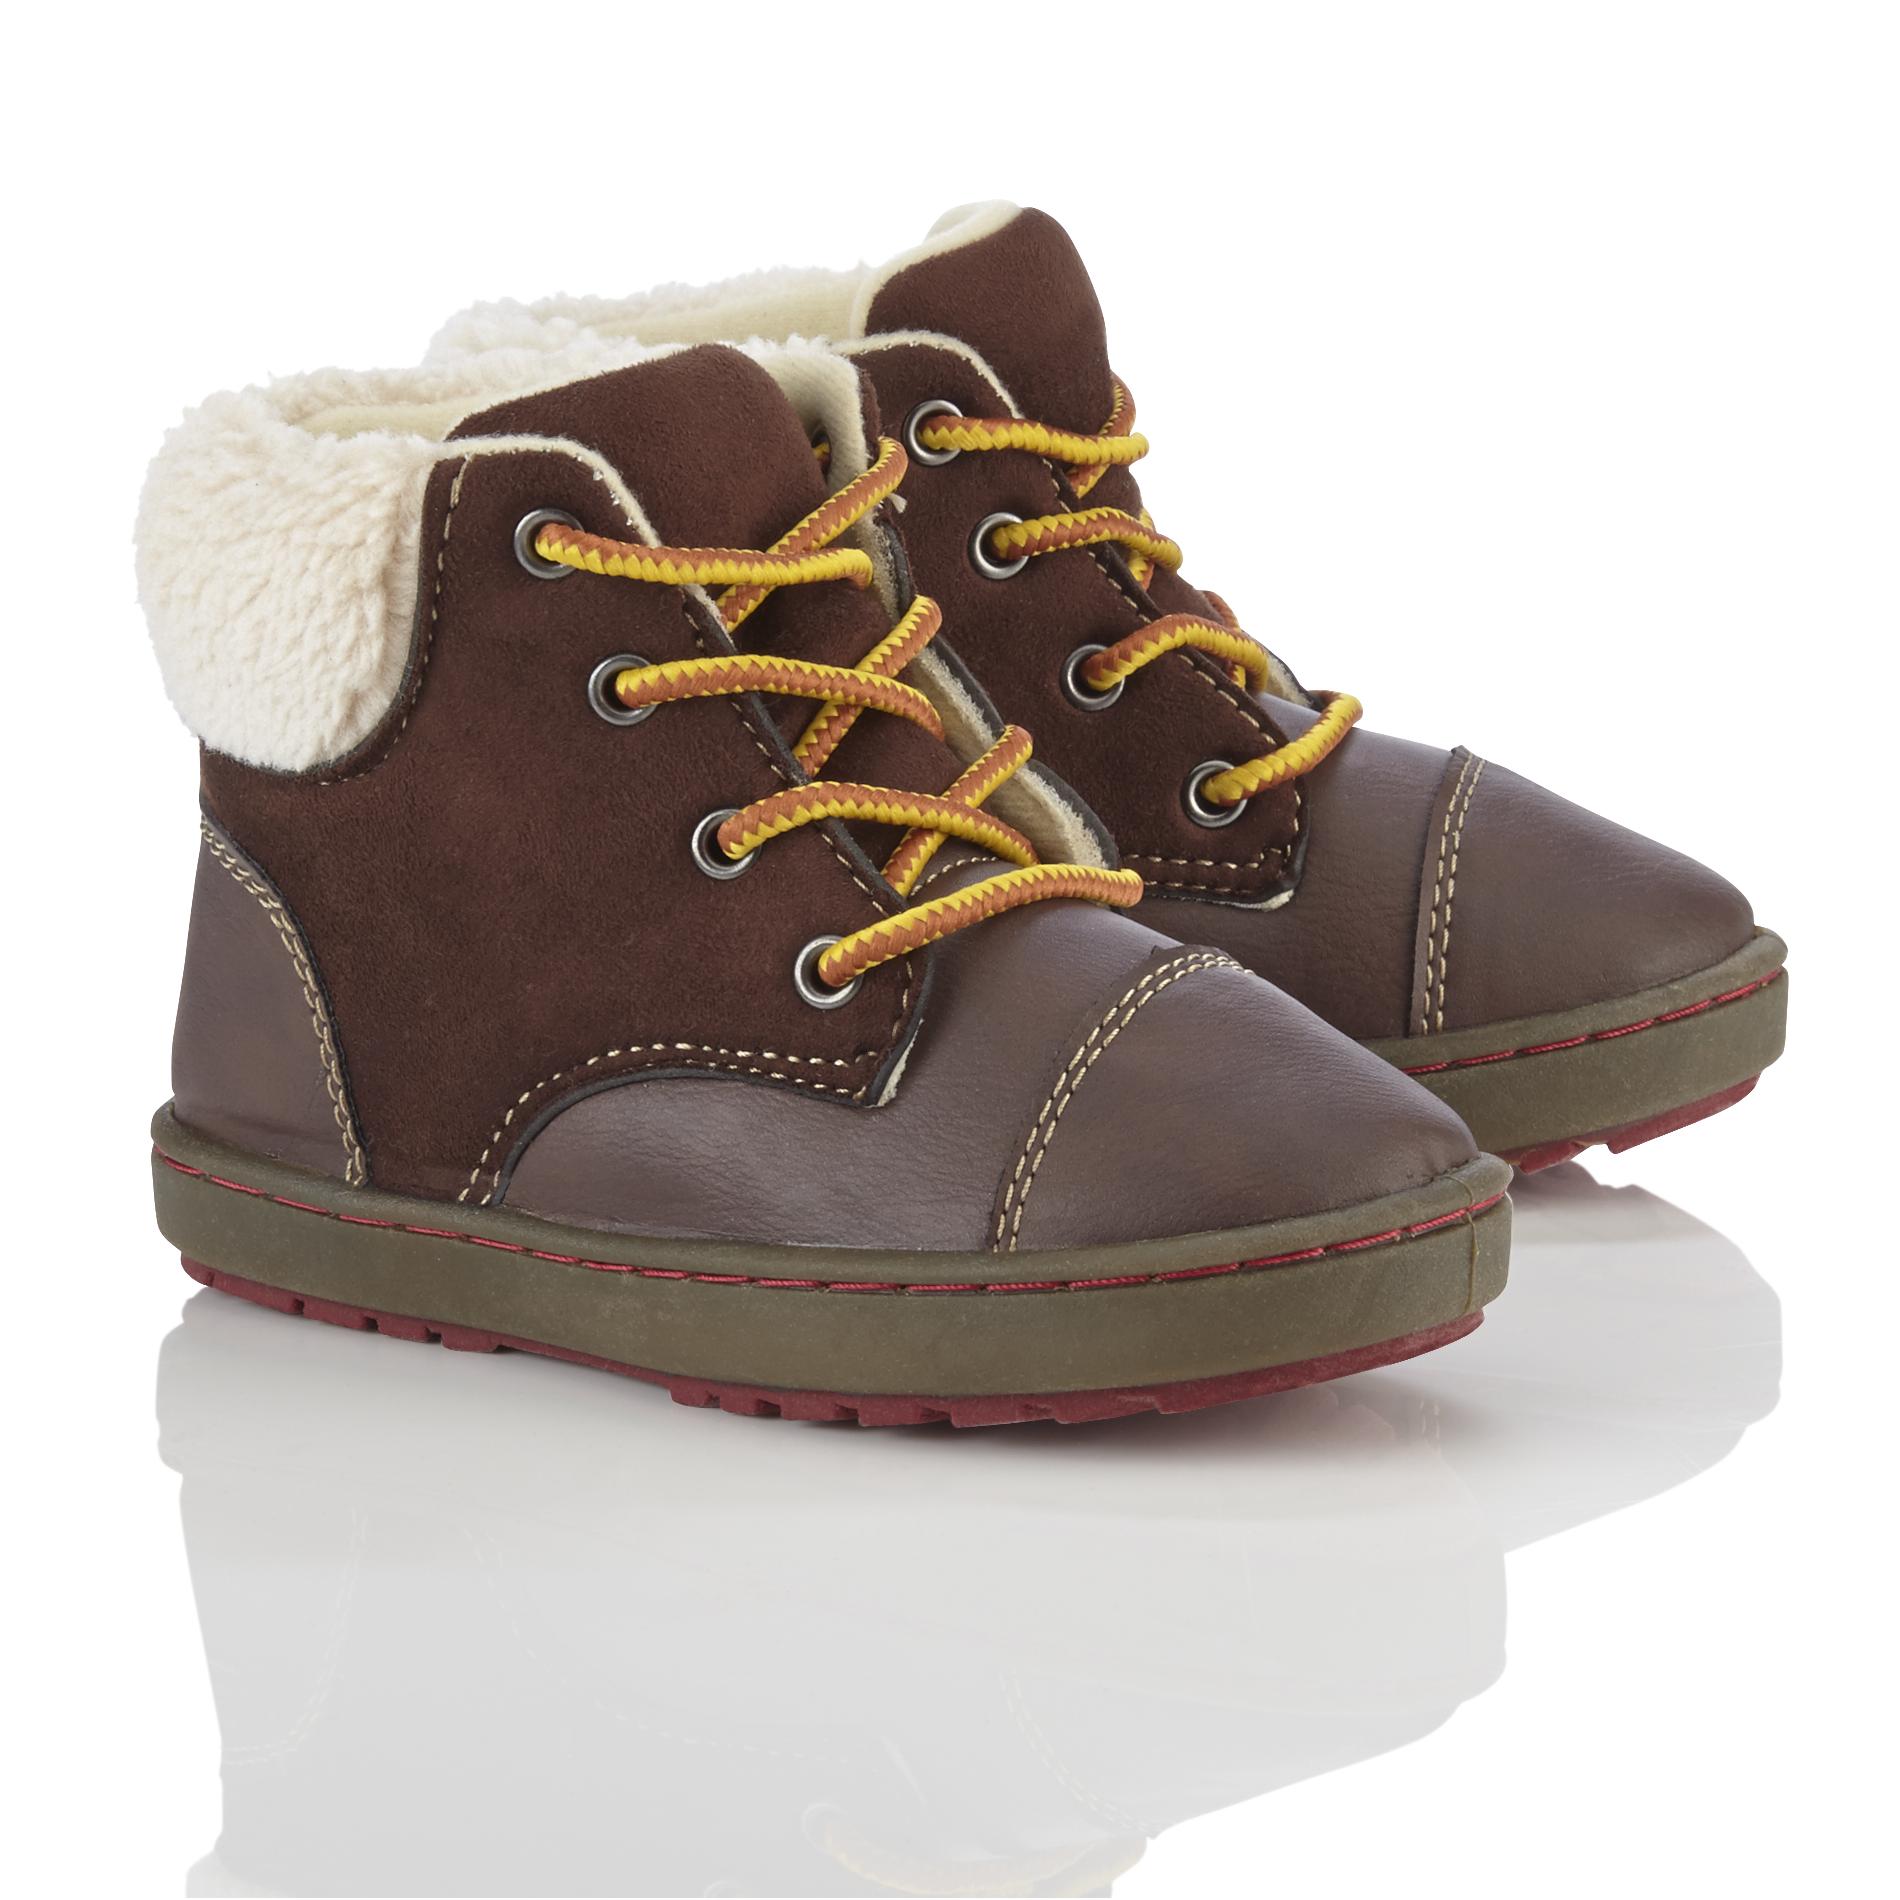 UPC 888737000087 product image for Toddler Boy's Eddy Brown Winter Boot | upcitemdb.com